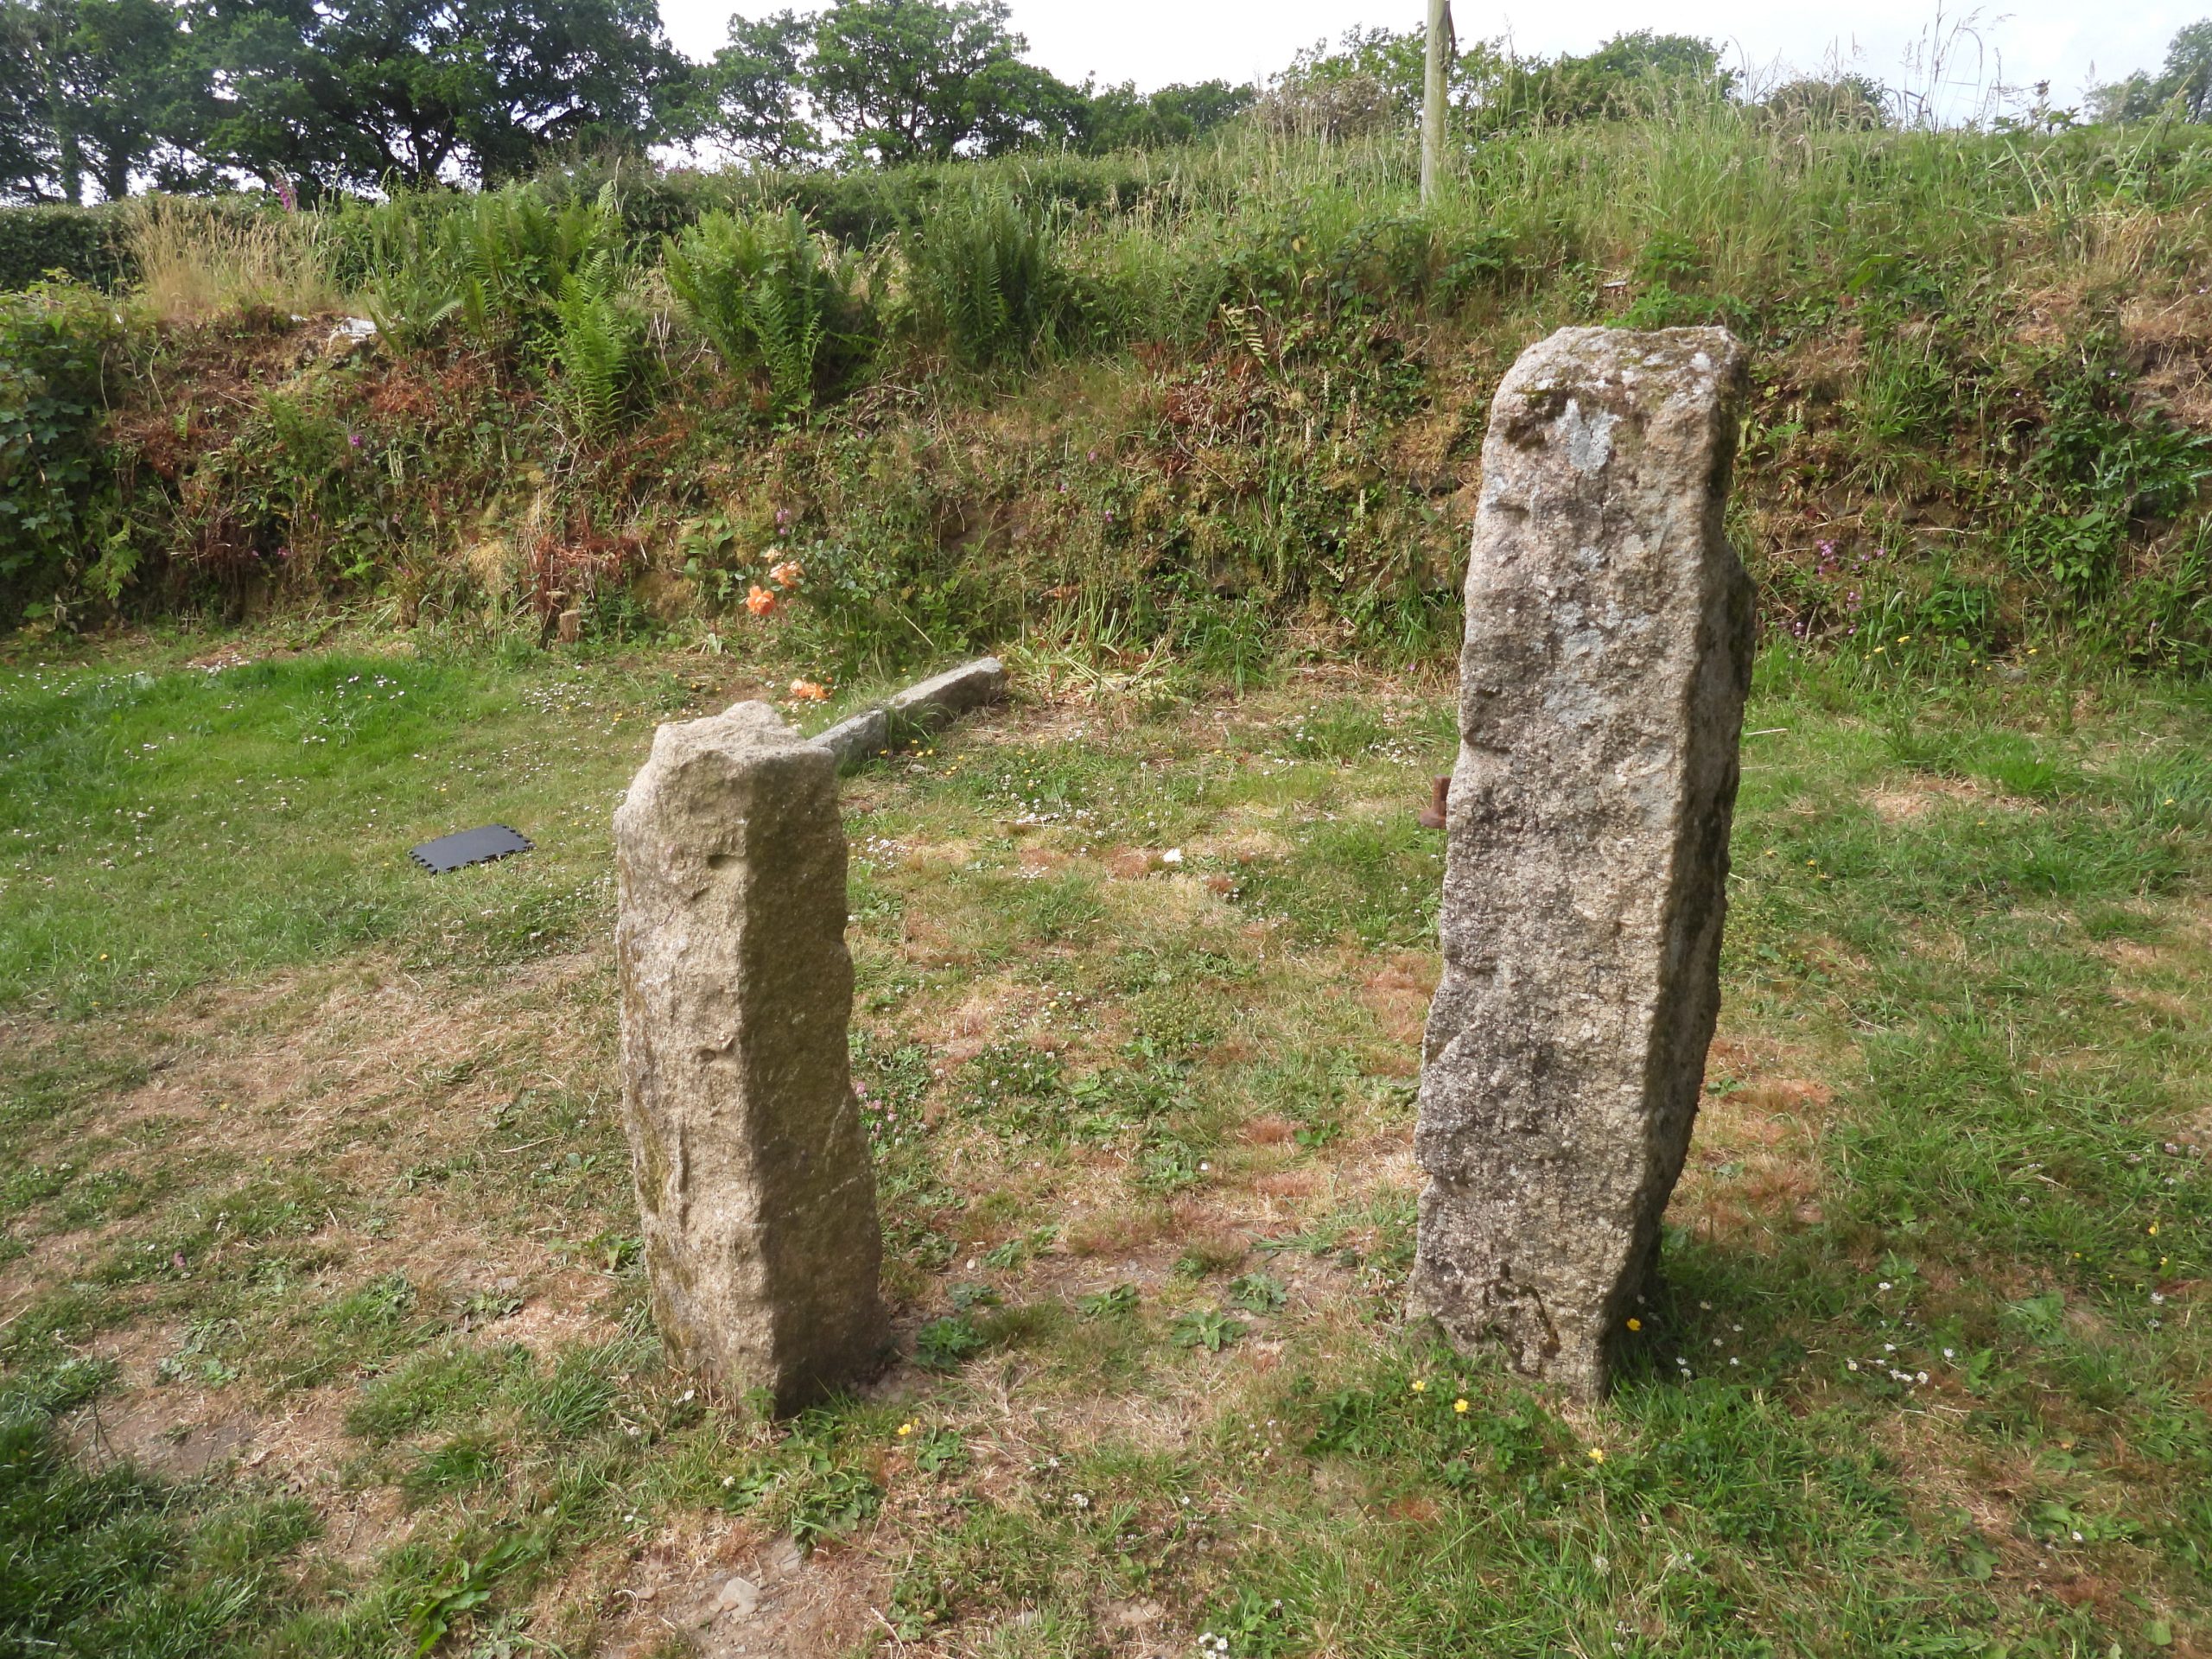 9. Standing Stones a